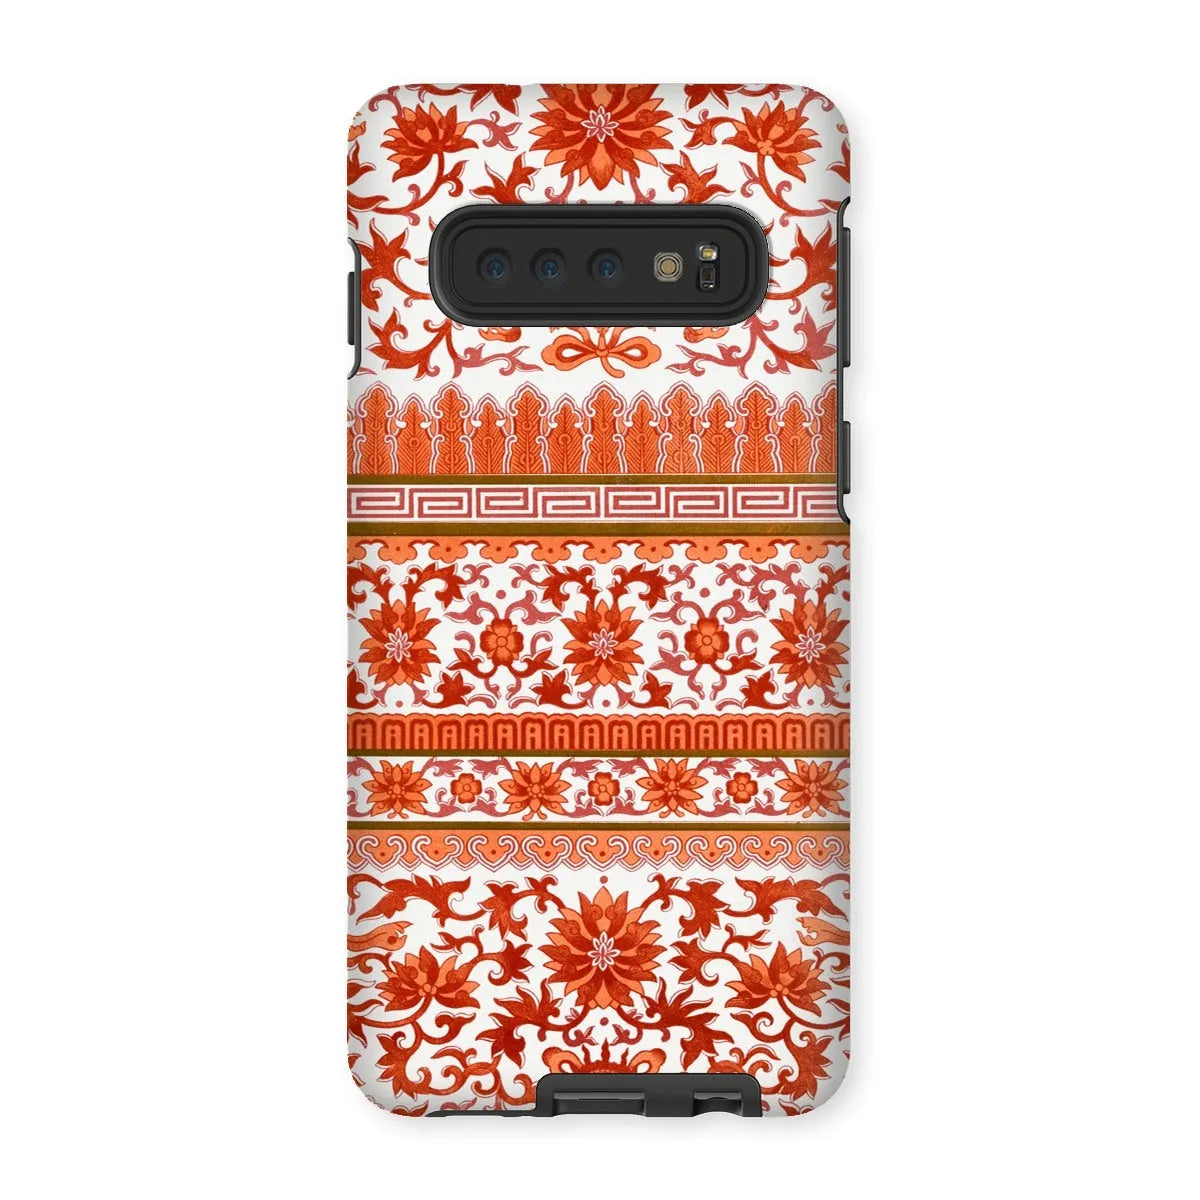 Fiery Chinese Floral Aesthetic Art Phone Case - Owen Jones - Samsung Galaxy S10 / Matte - Mobile Phone Cases